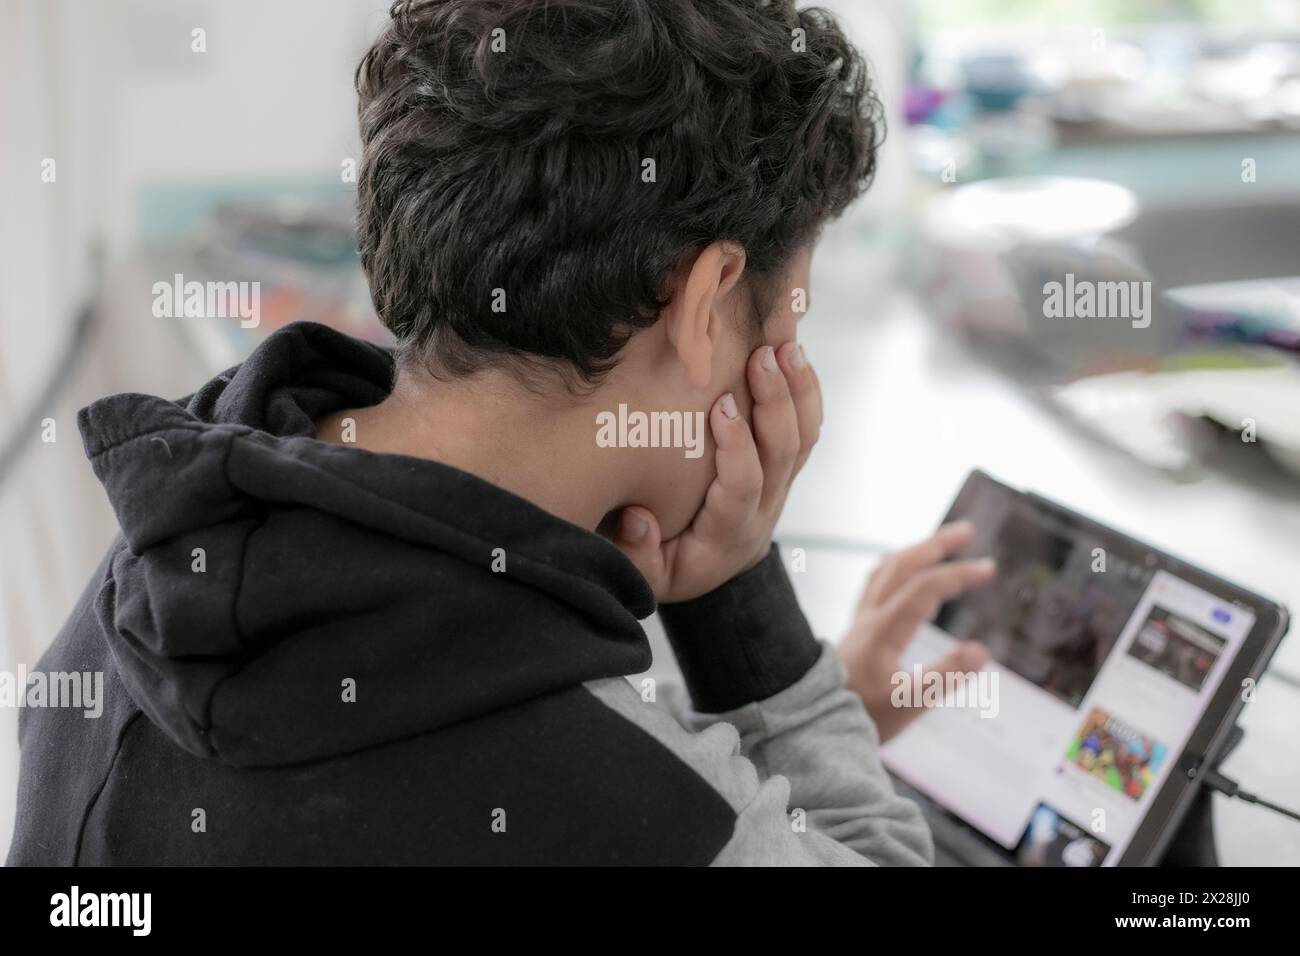 Young boy using digital tablet Stock Photo